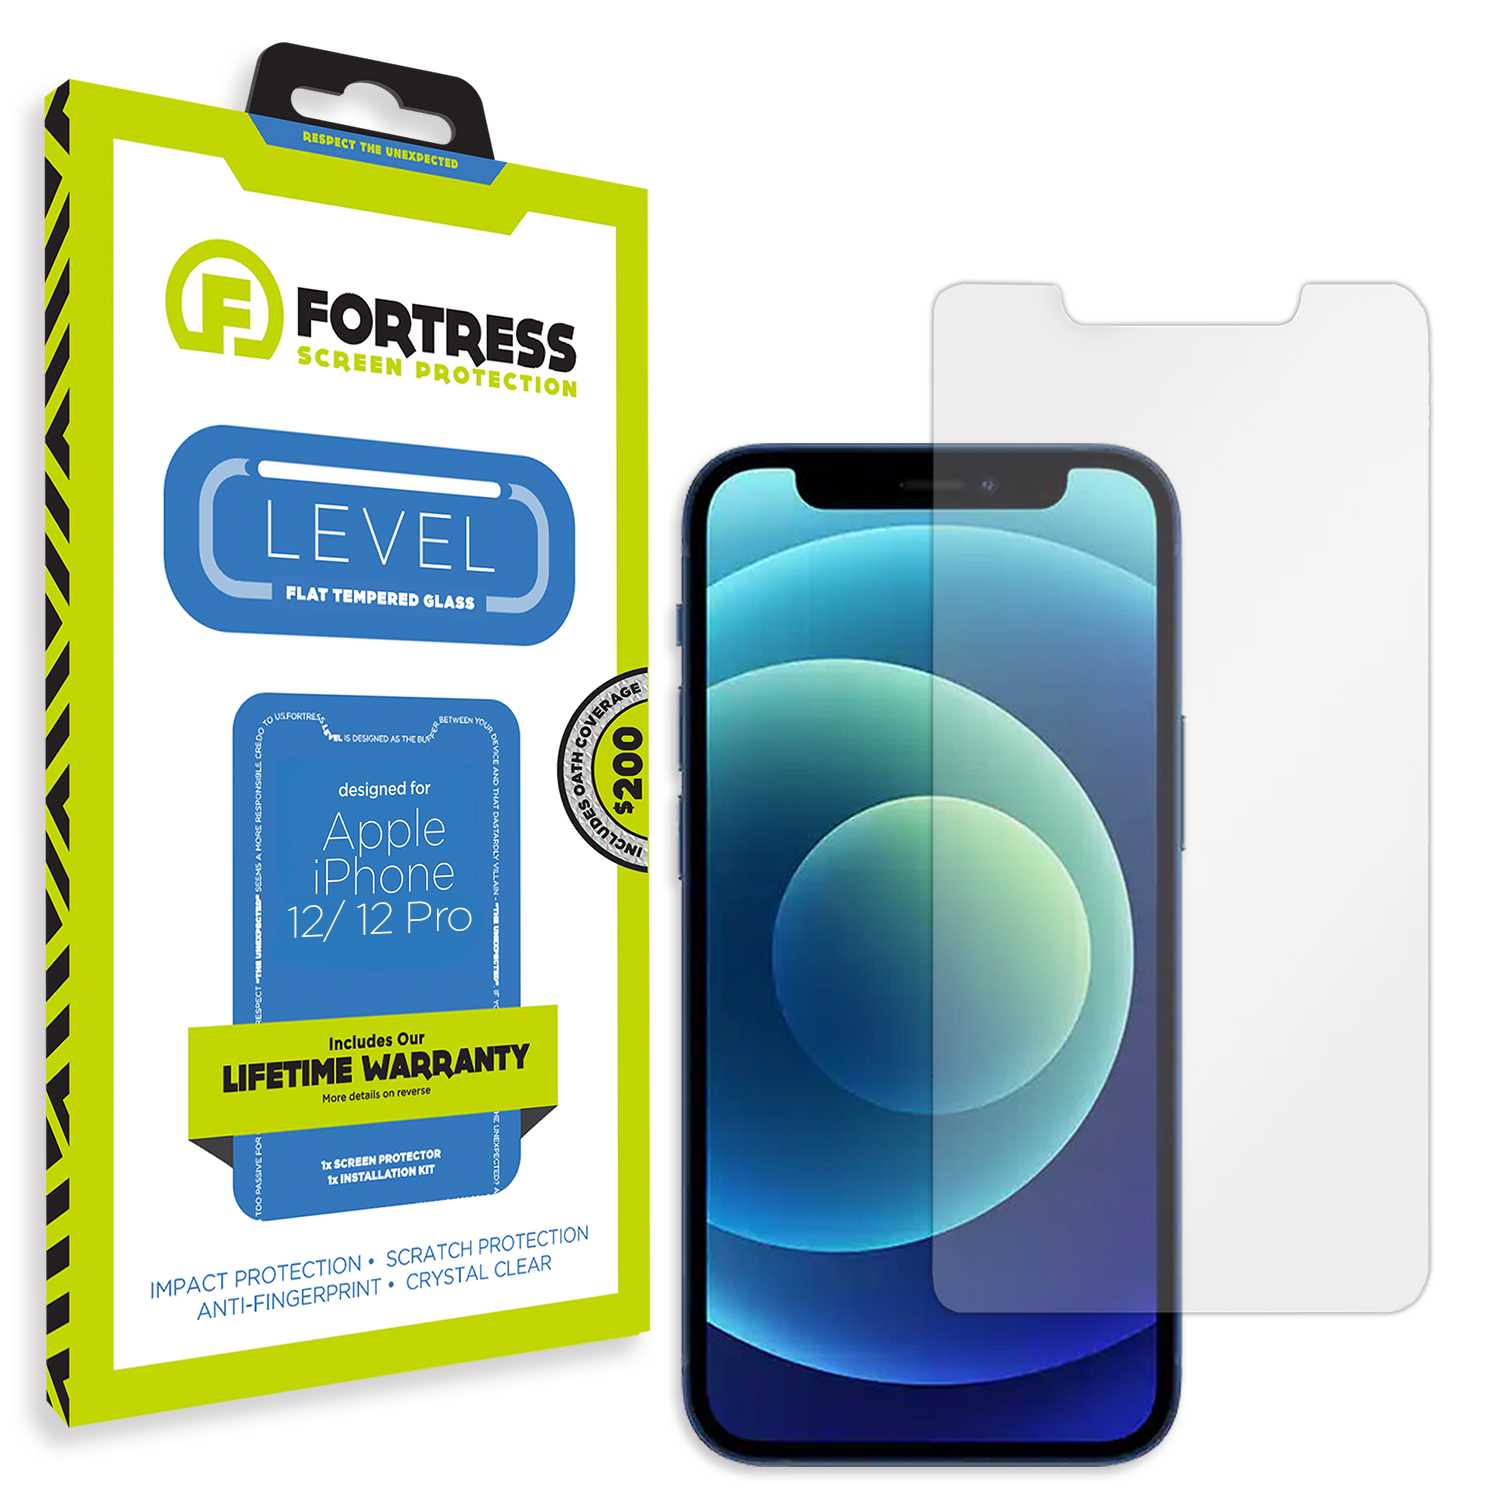 Fortress iPhone 12 Pro Screen Protector $200Coverage Scooch Screen Protector